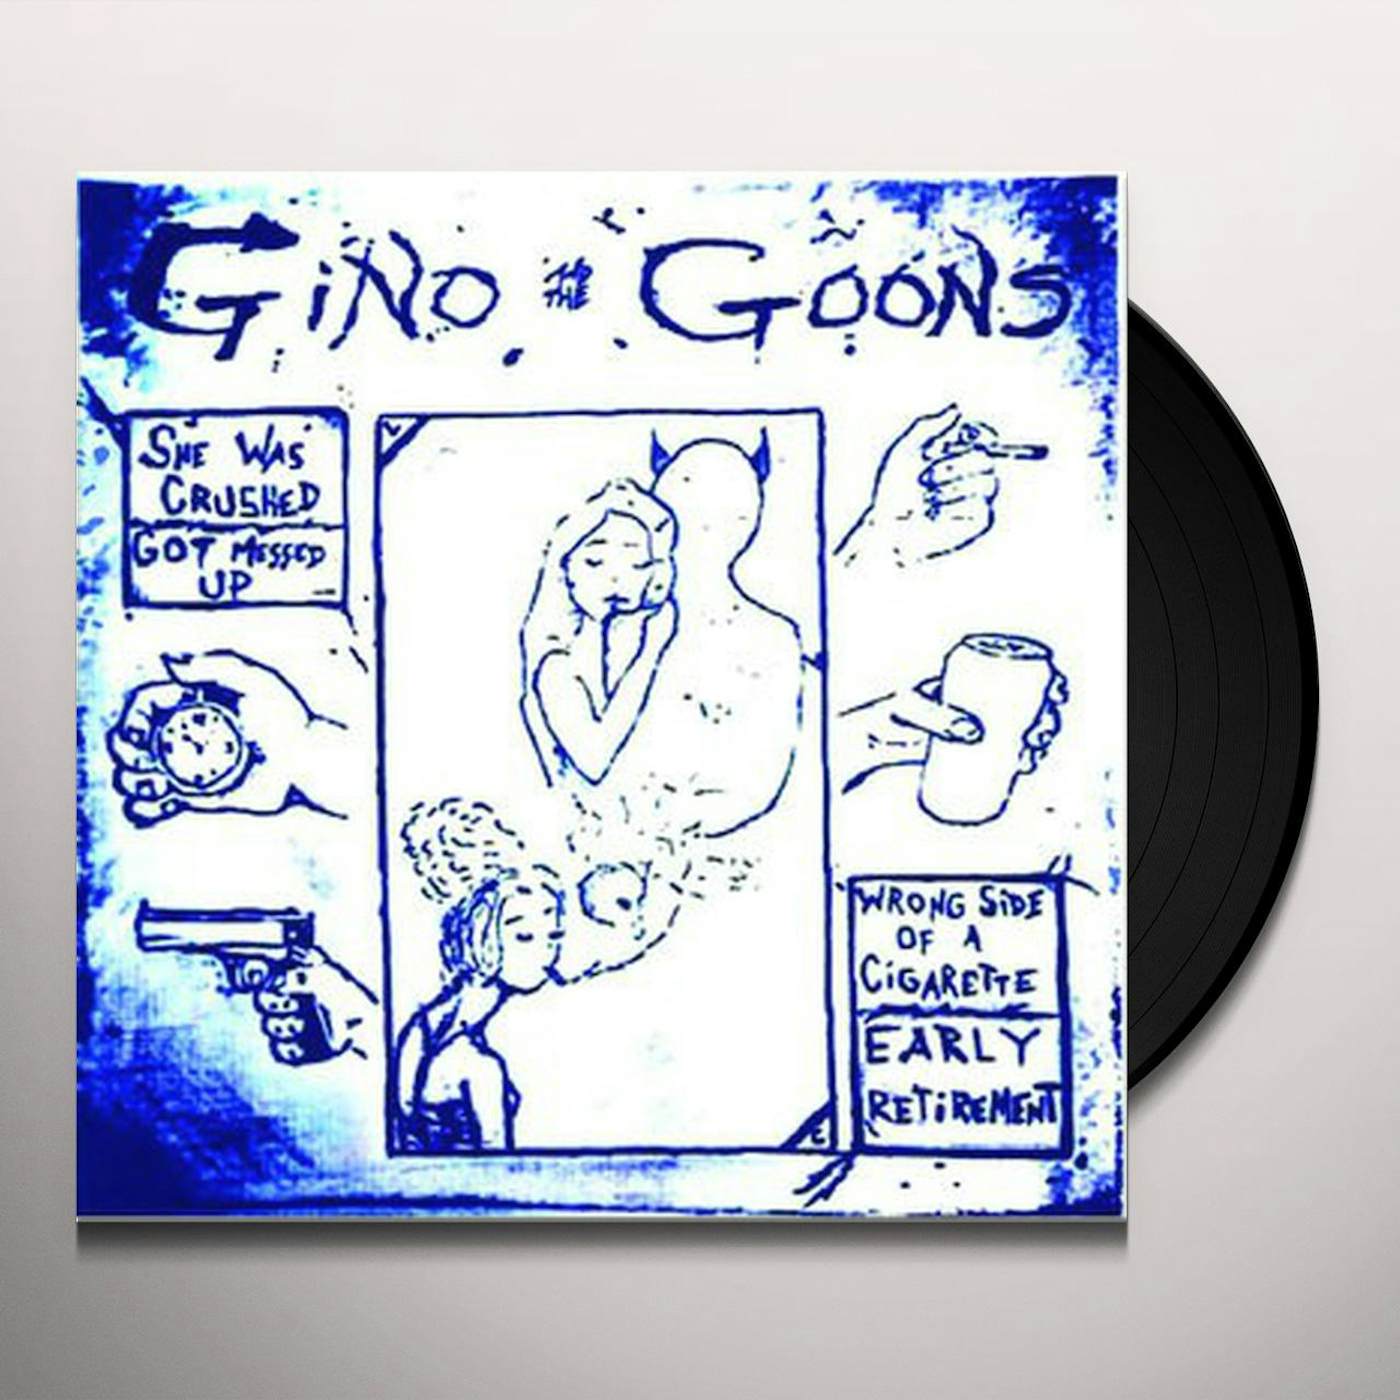 Gino and the Goons She Was Crushed Vinyl Record